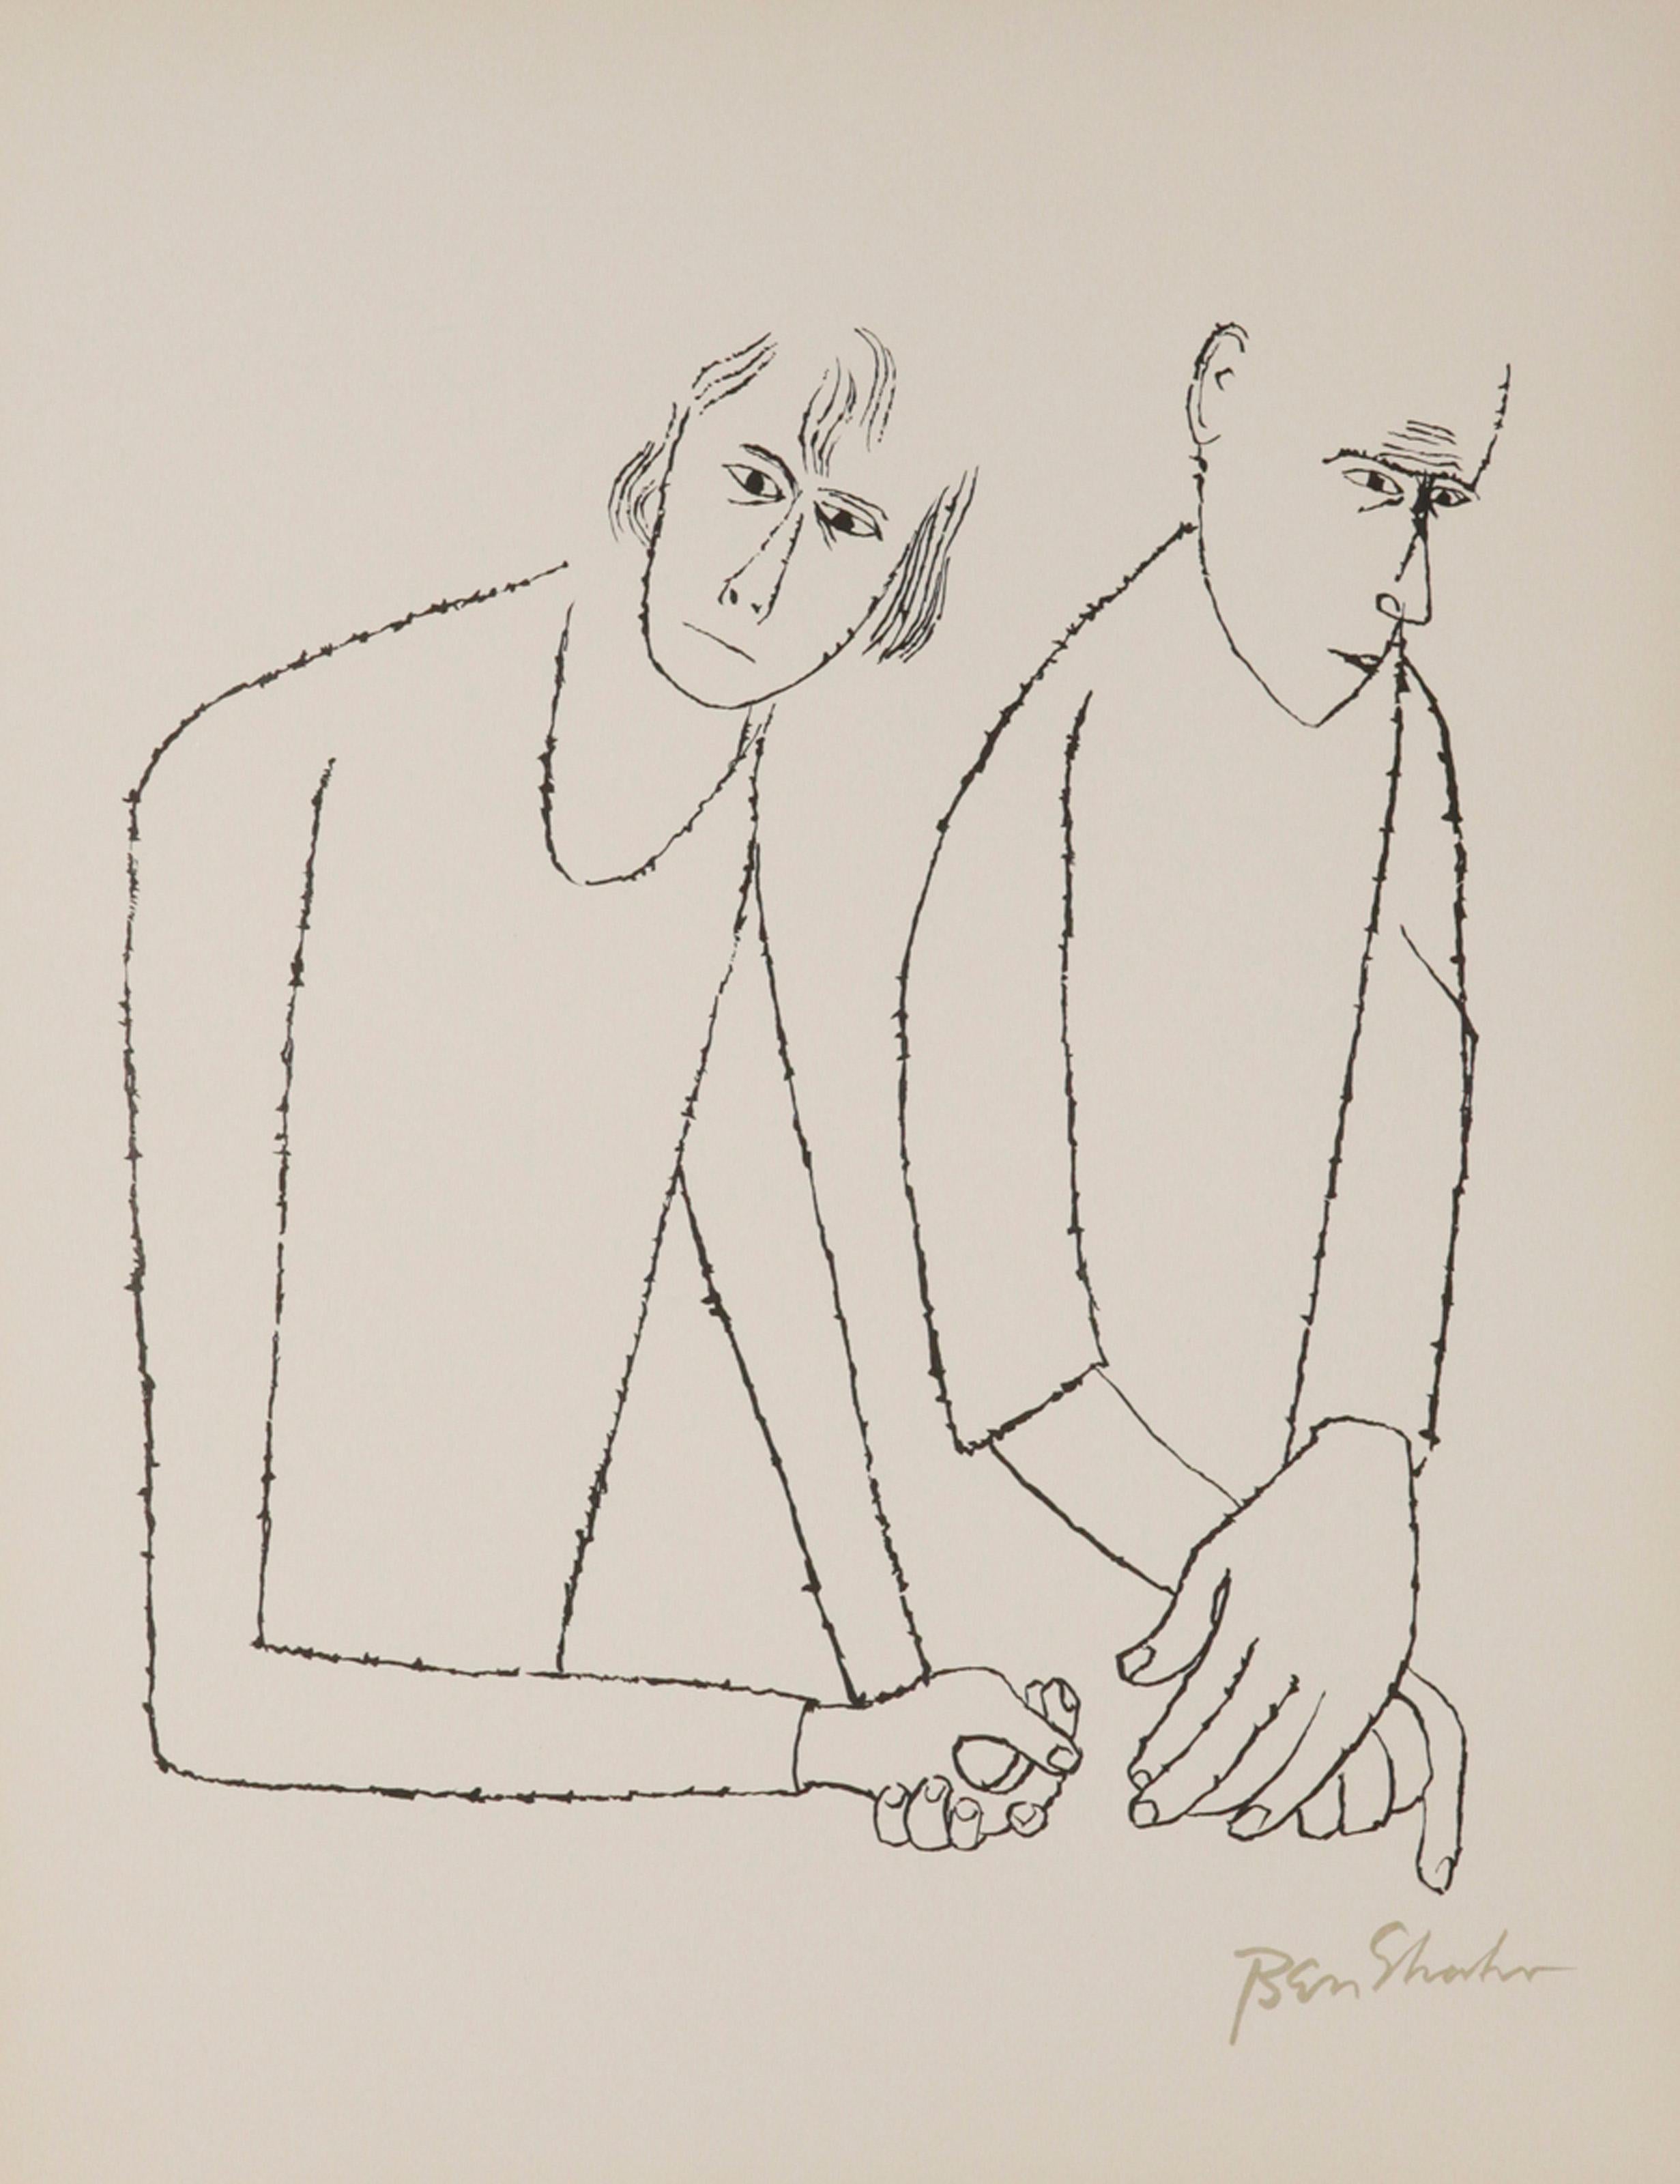 To Parents One Had to Hurt from the Rilke Portfolio, lithograph by Ben Shahn